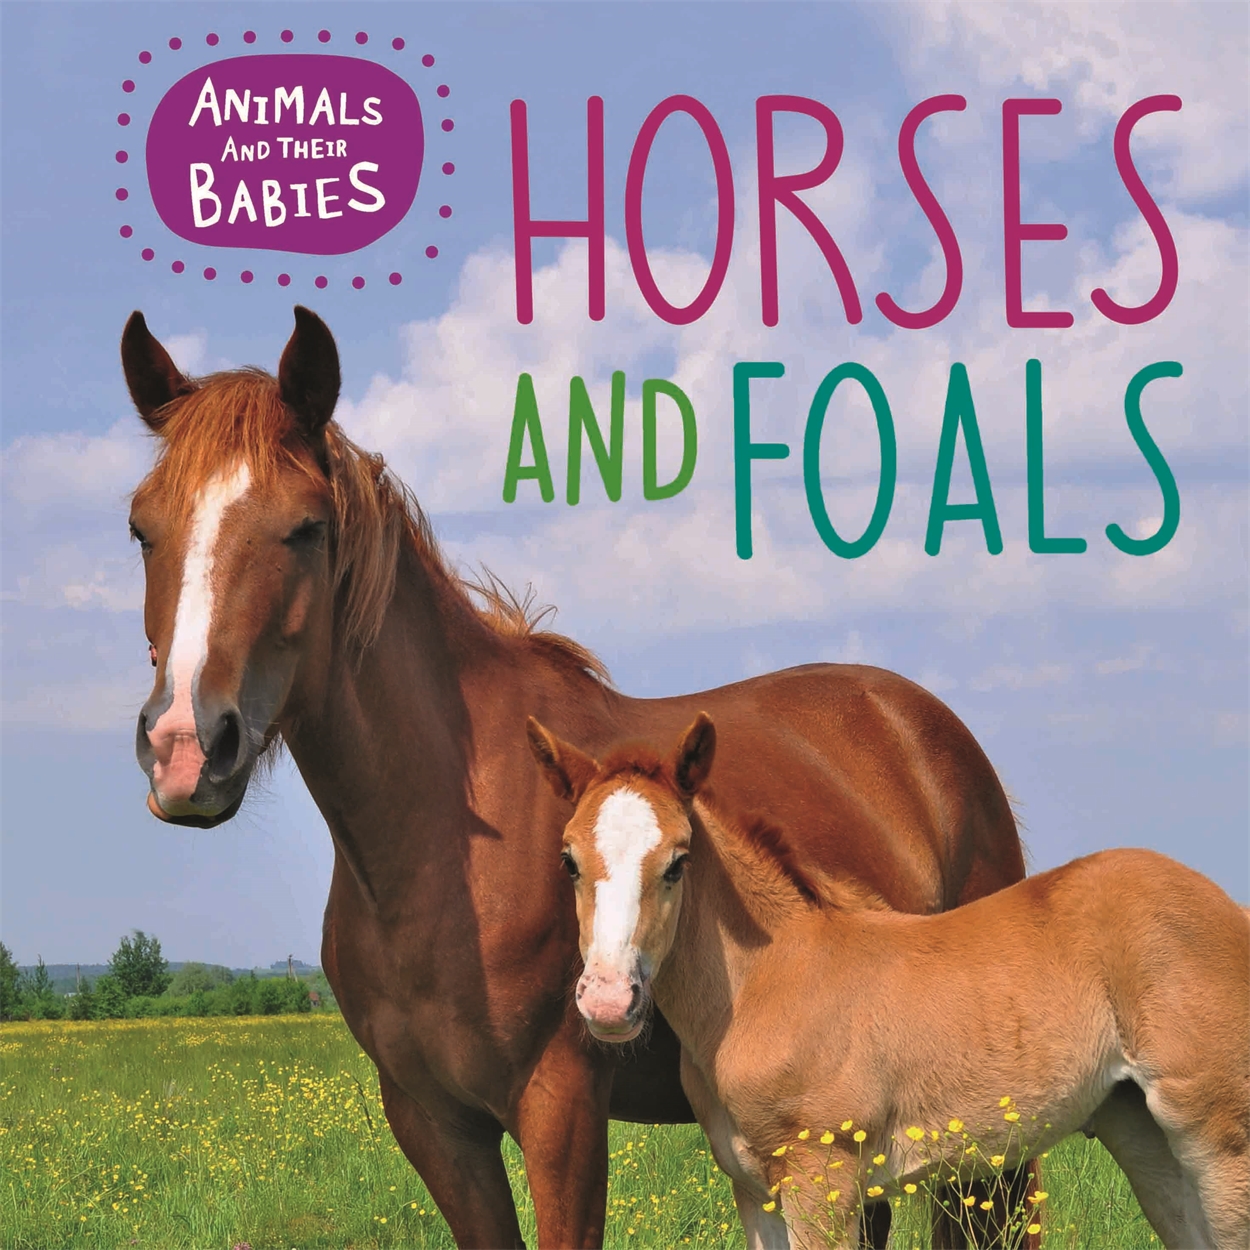 Animals and their Babies: Horses & foals by Annabelle Lynch | Hachette UK